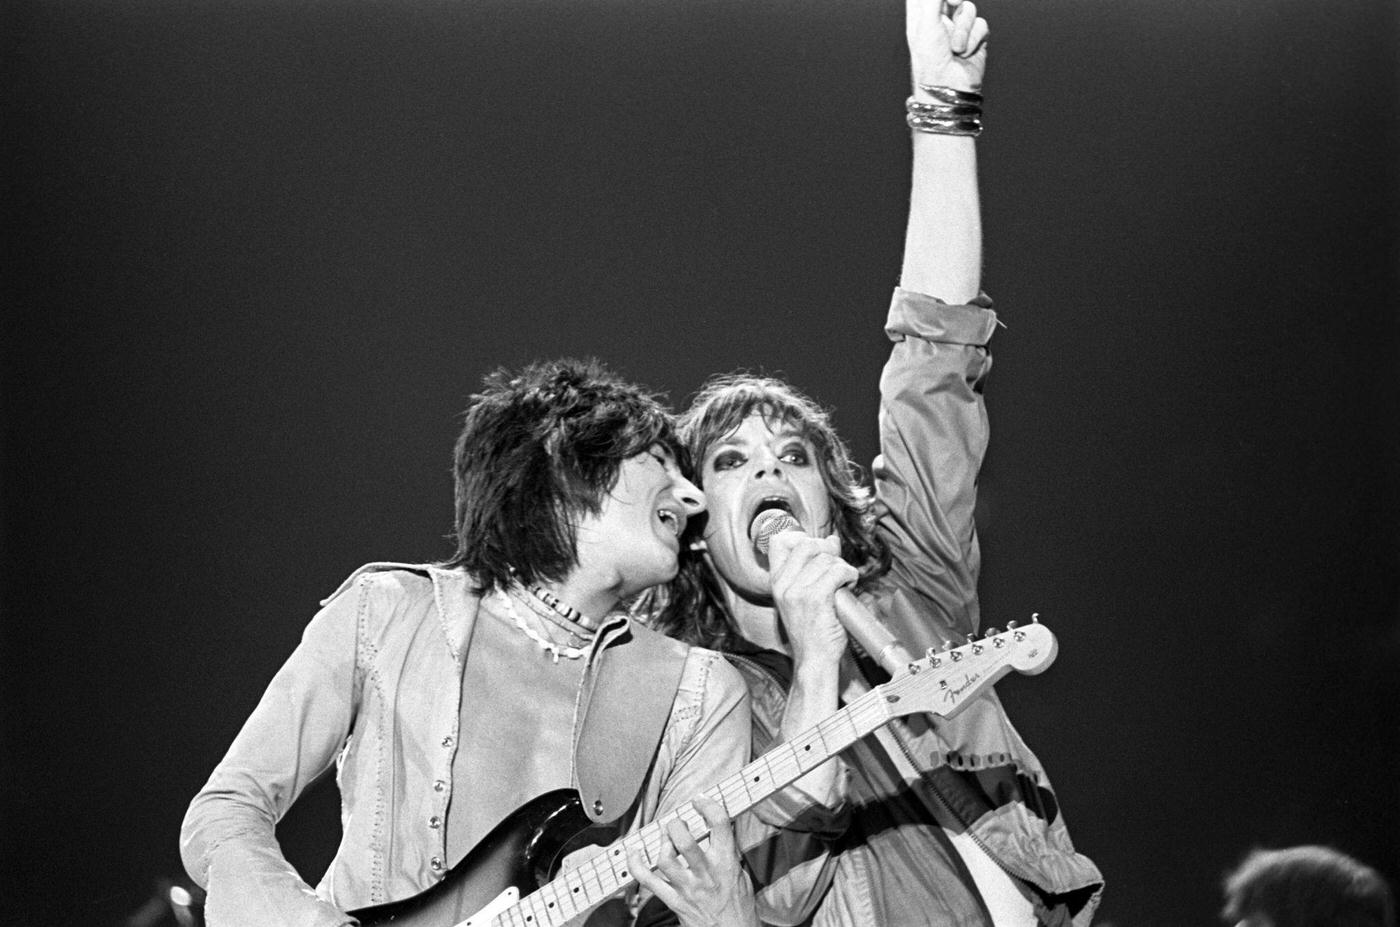 Ronnie Wood and Mick Jagger perform on stage at Madison Square Garden during the band's "Tour of America '75" on July 23, 1975, in New York, New York.